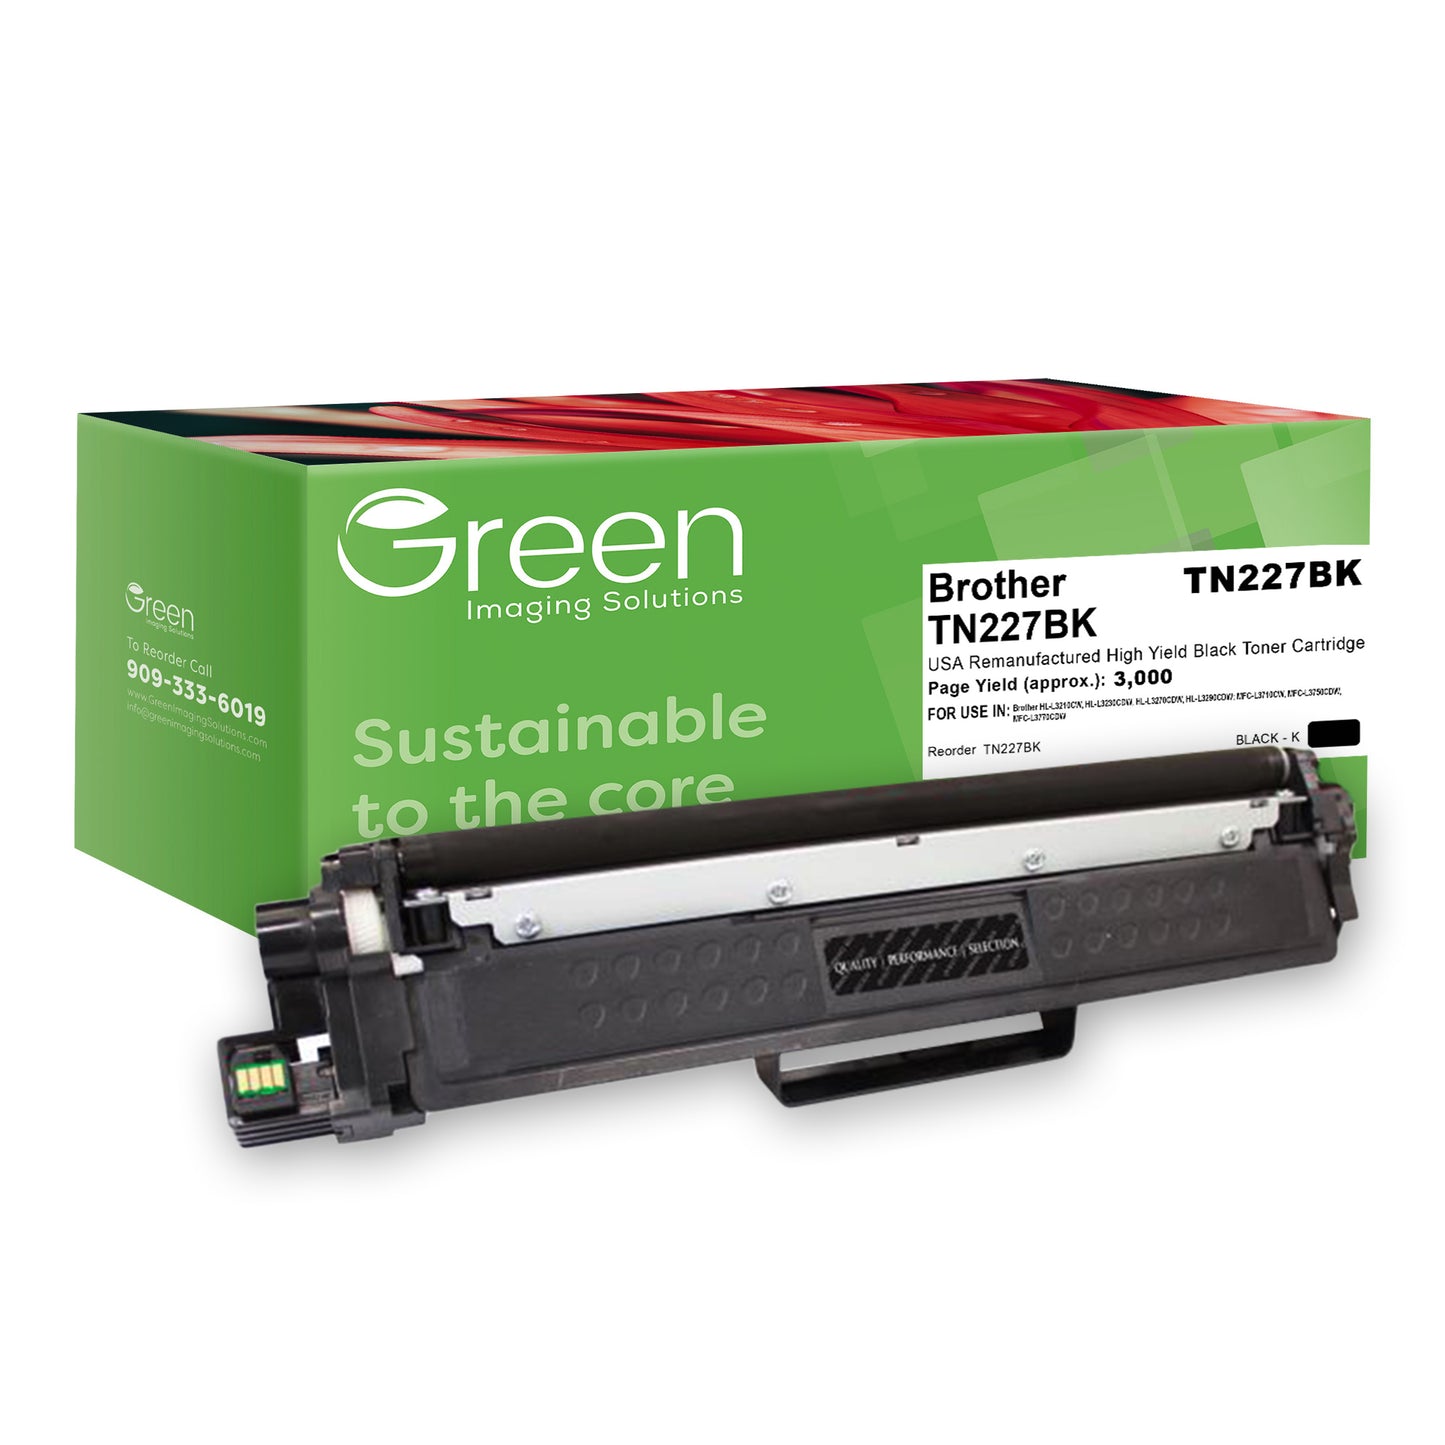 Green Imaging Solutions USA Remanufactured High Yield Black Toner Cartridge for Brother TN227